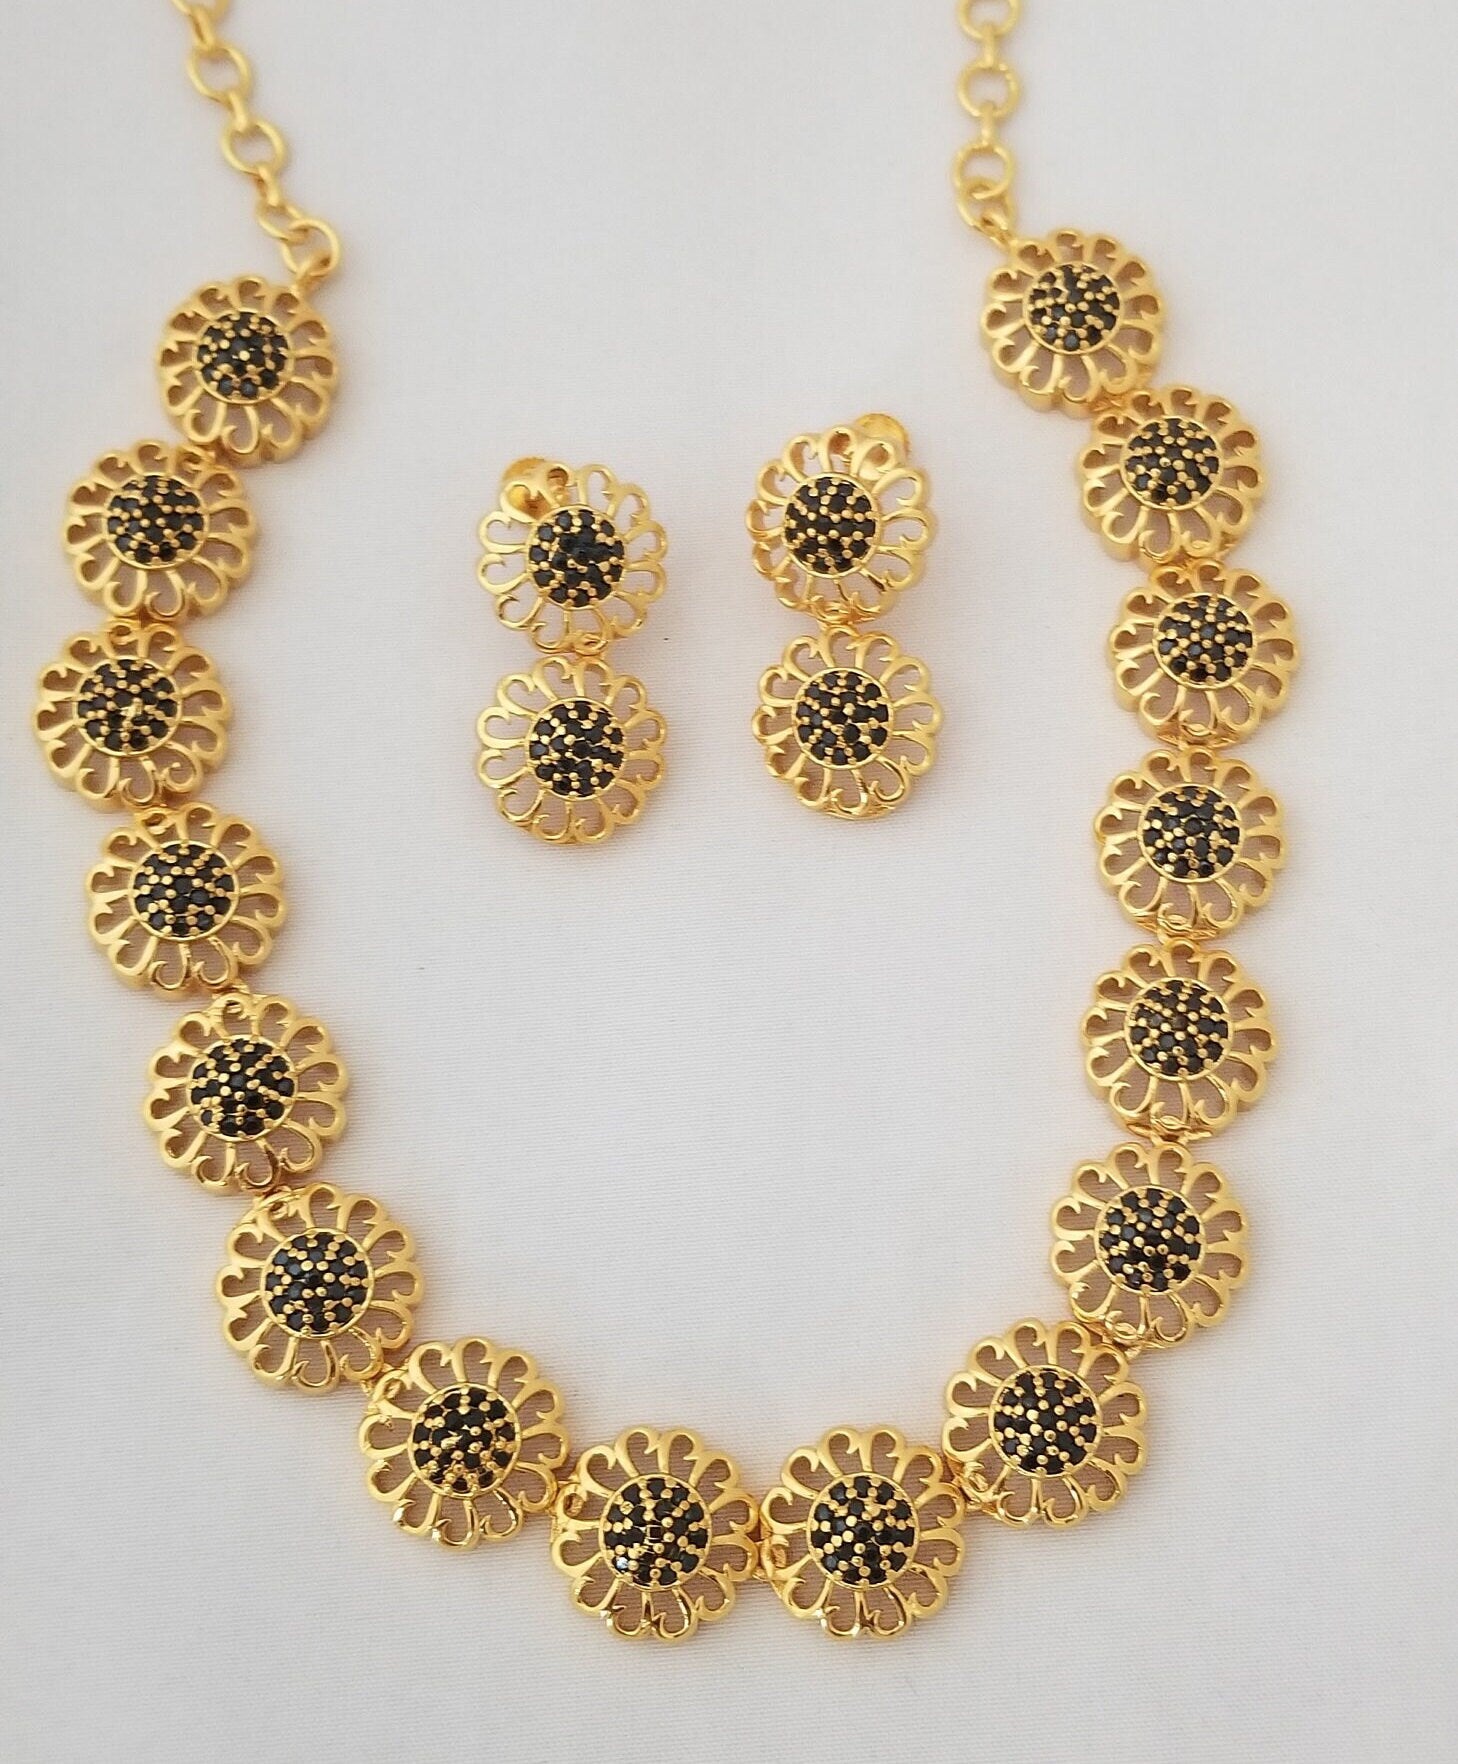 Flower Type Gold Polish Black stone Necklace with matching Earrings - Flower type Necklace